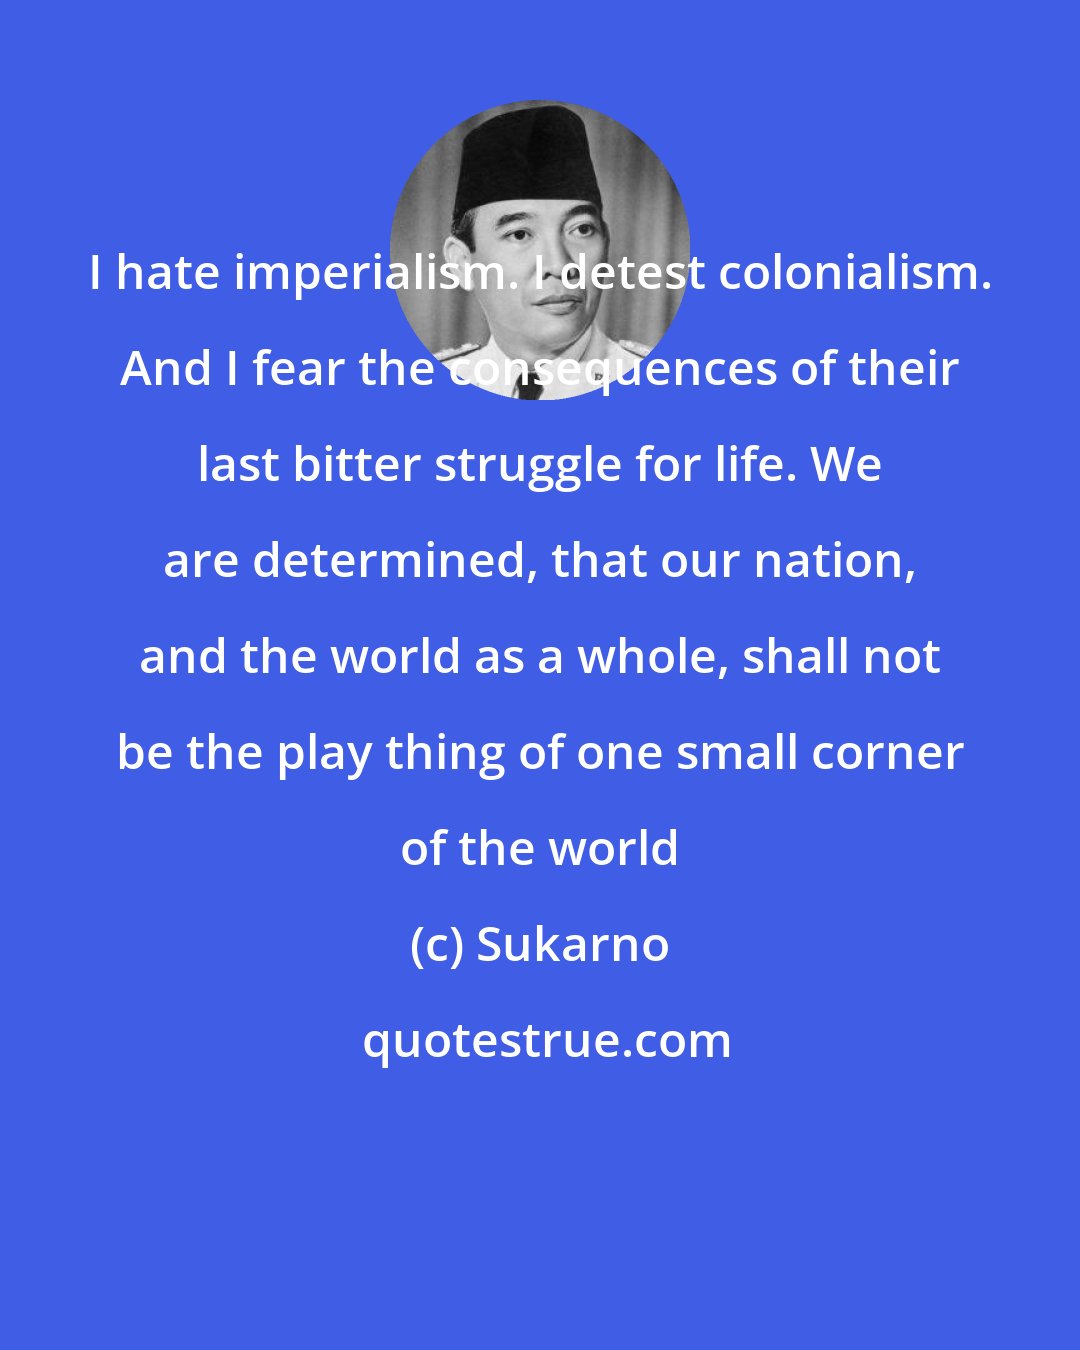 Sukarno: I hate imperialism. I detest colonialism. And I fear the consequences of their last bitter struggle for life. We are determined, that our nation, and the world as a whole, shall not be the play thing of one small corner of the world